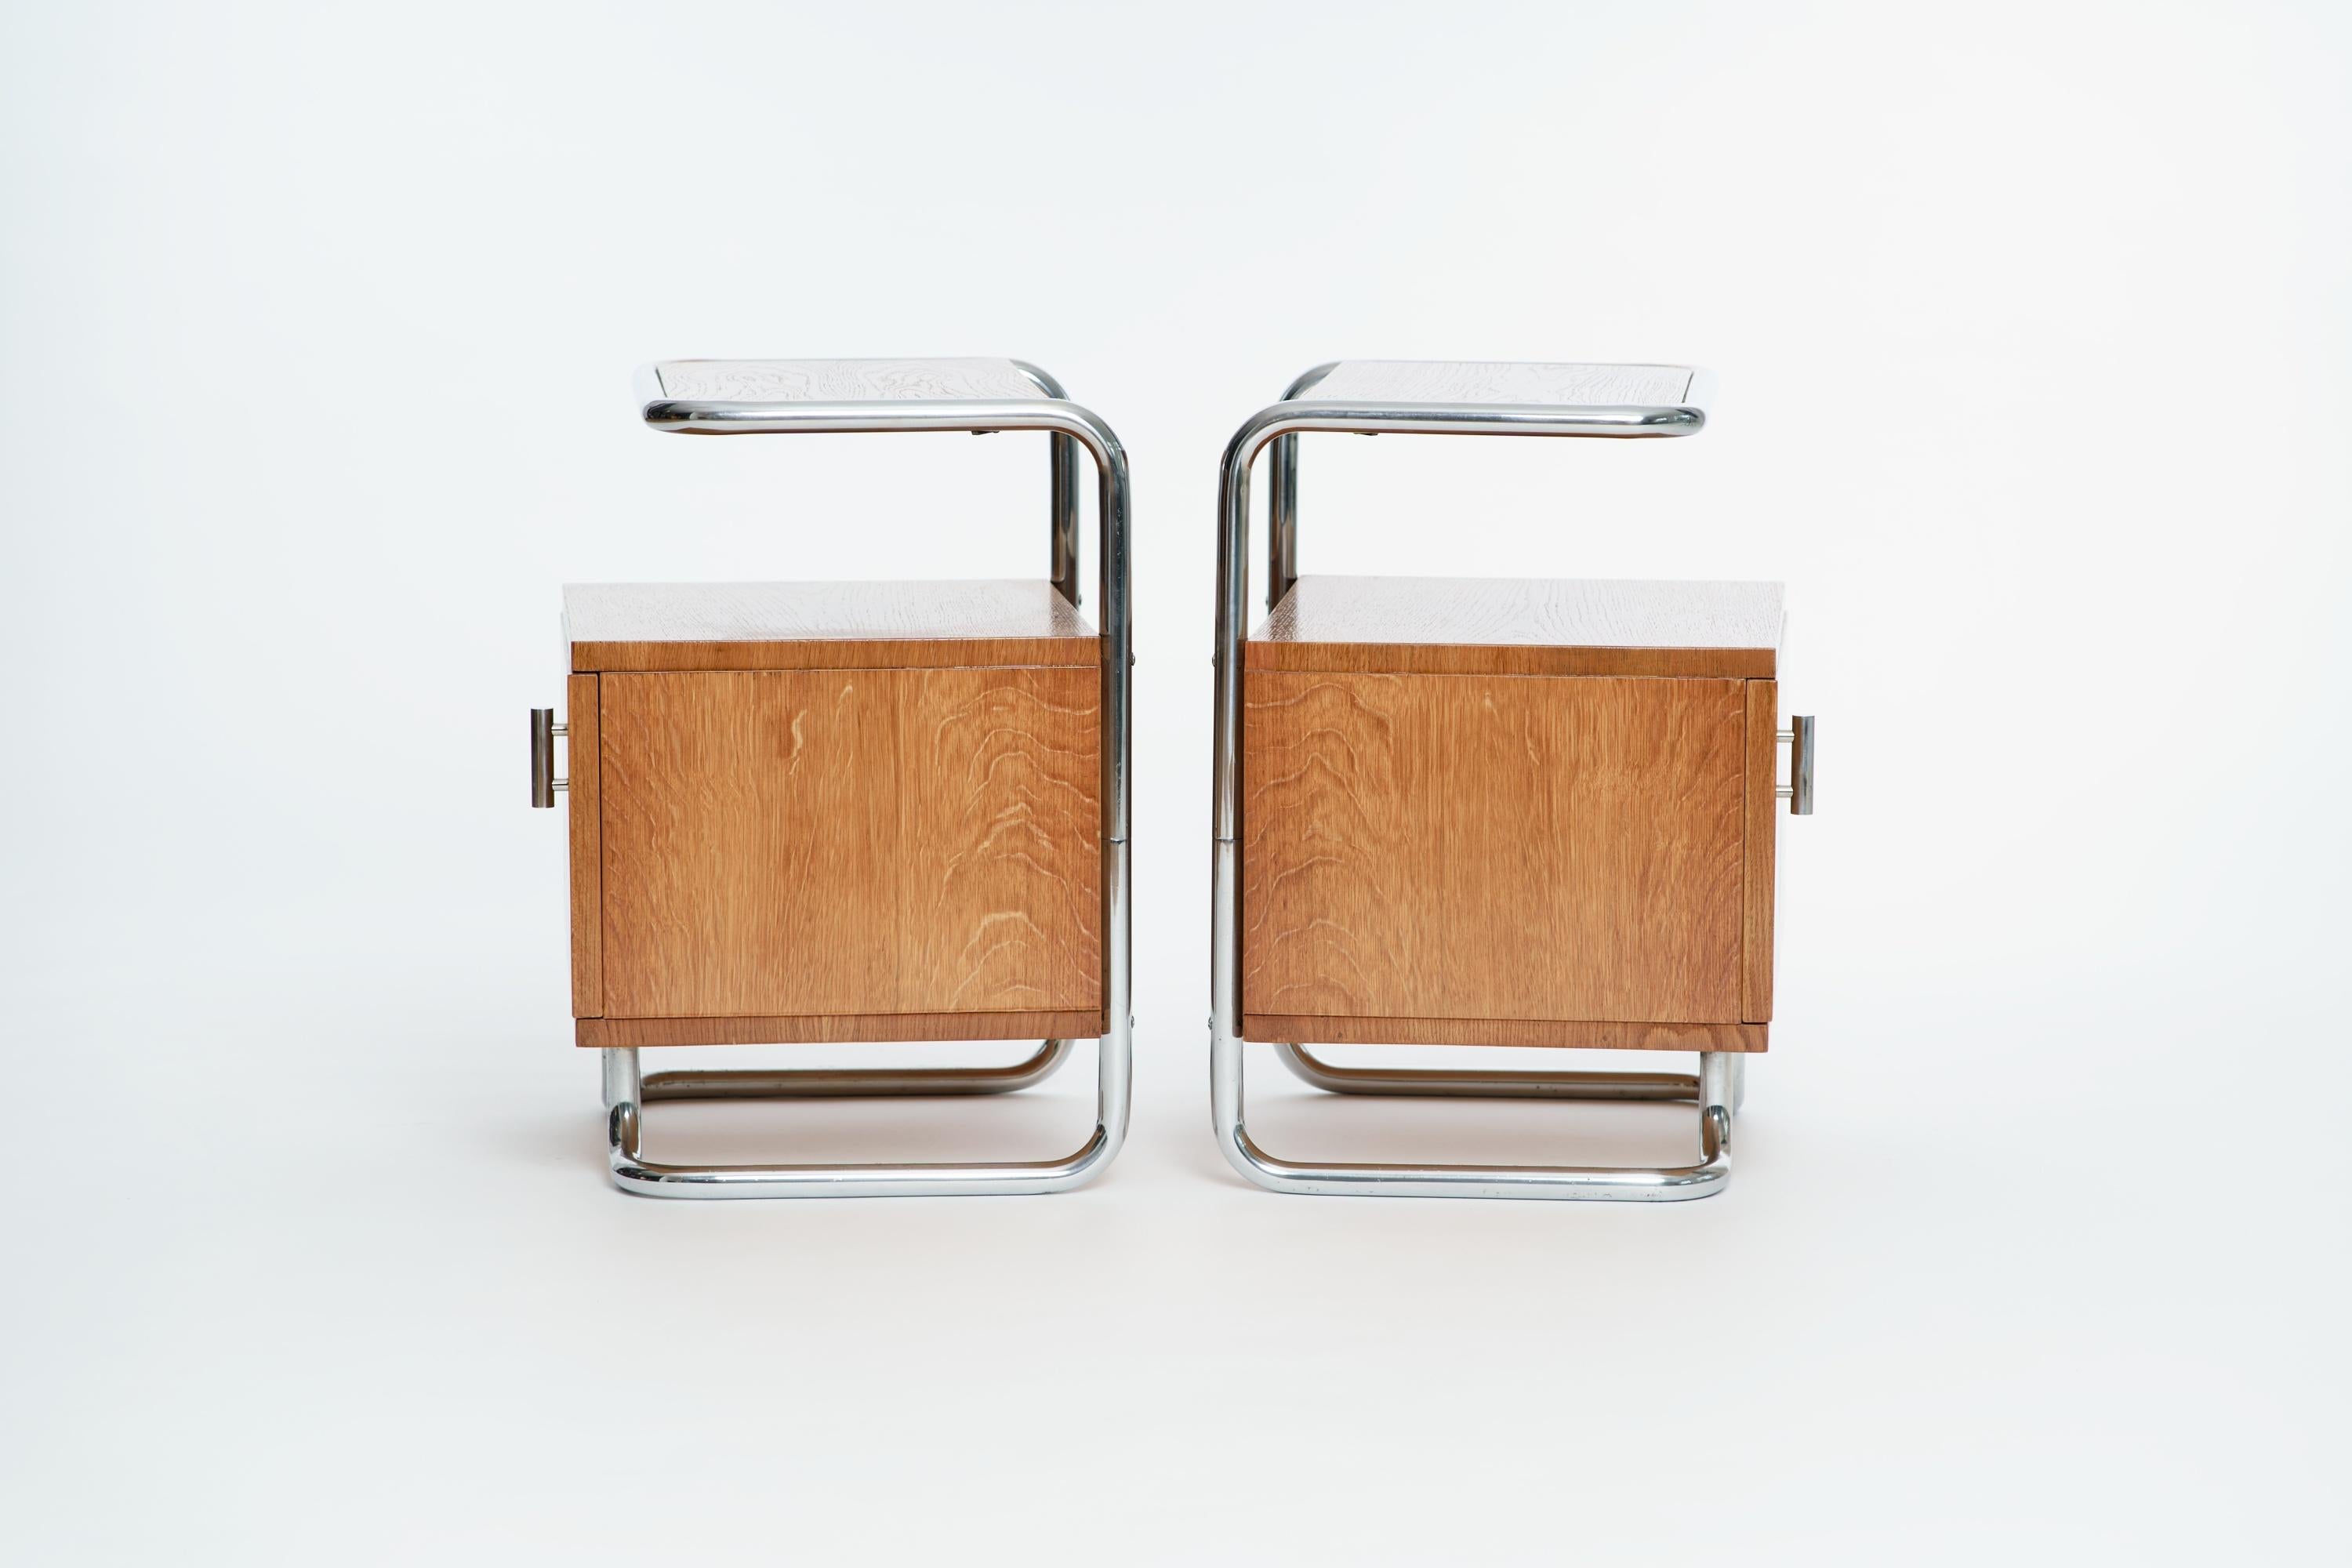 20th Century Art Deco Chrome and Tubular Steel Sideboards from Kovona, Set of 2